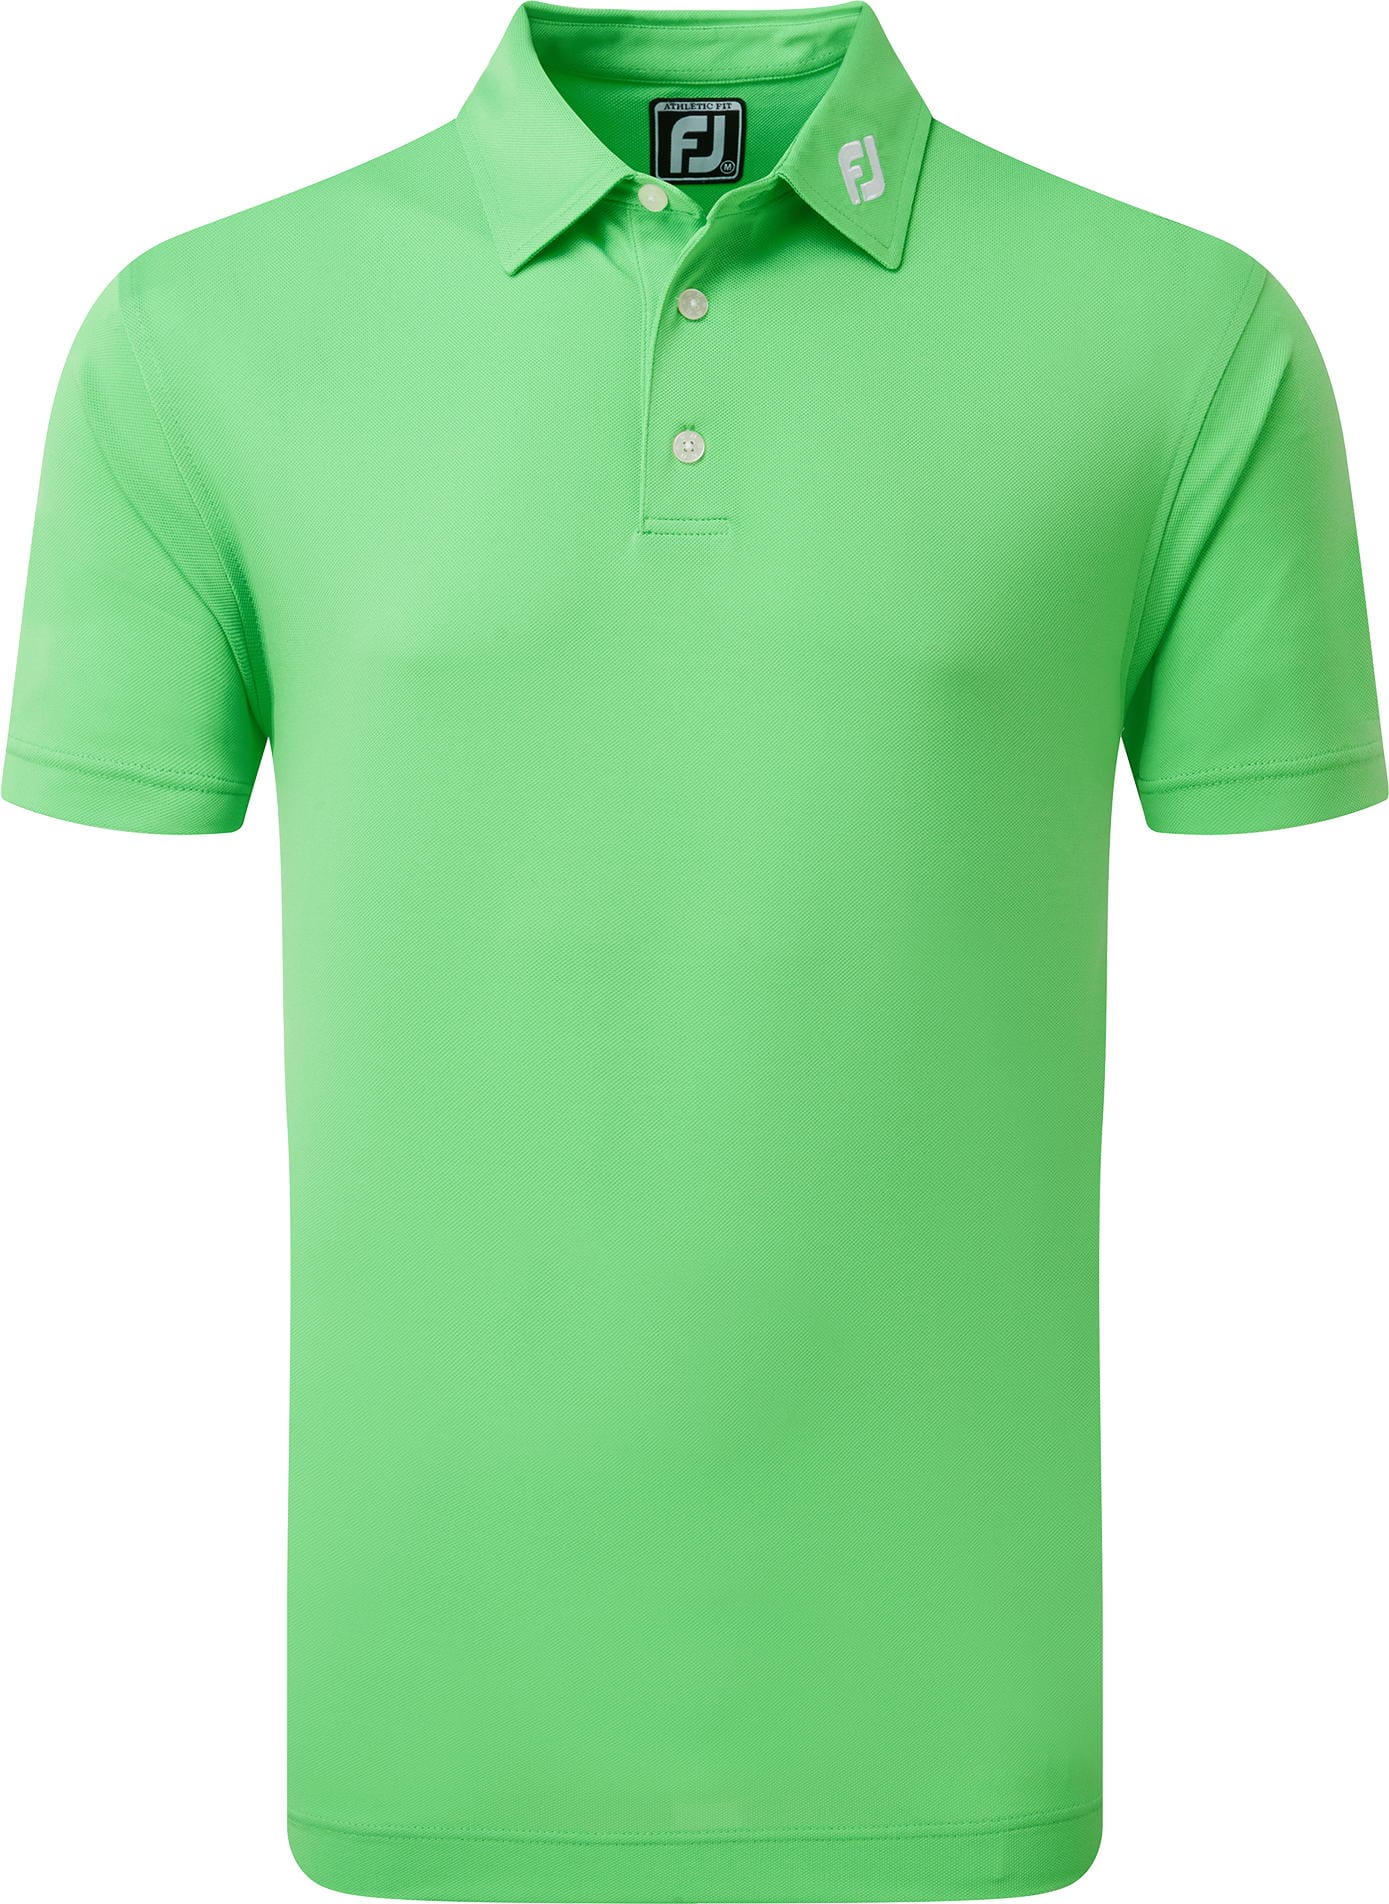 FootJoy Stretch Pique Solid Polo, green